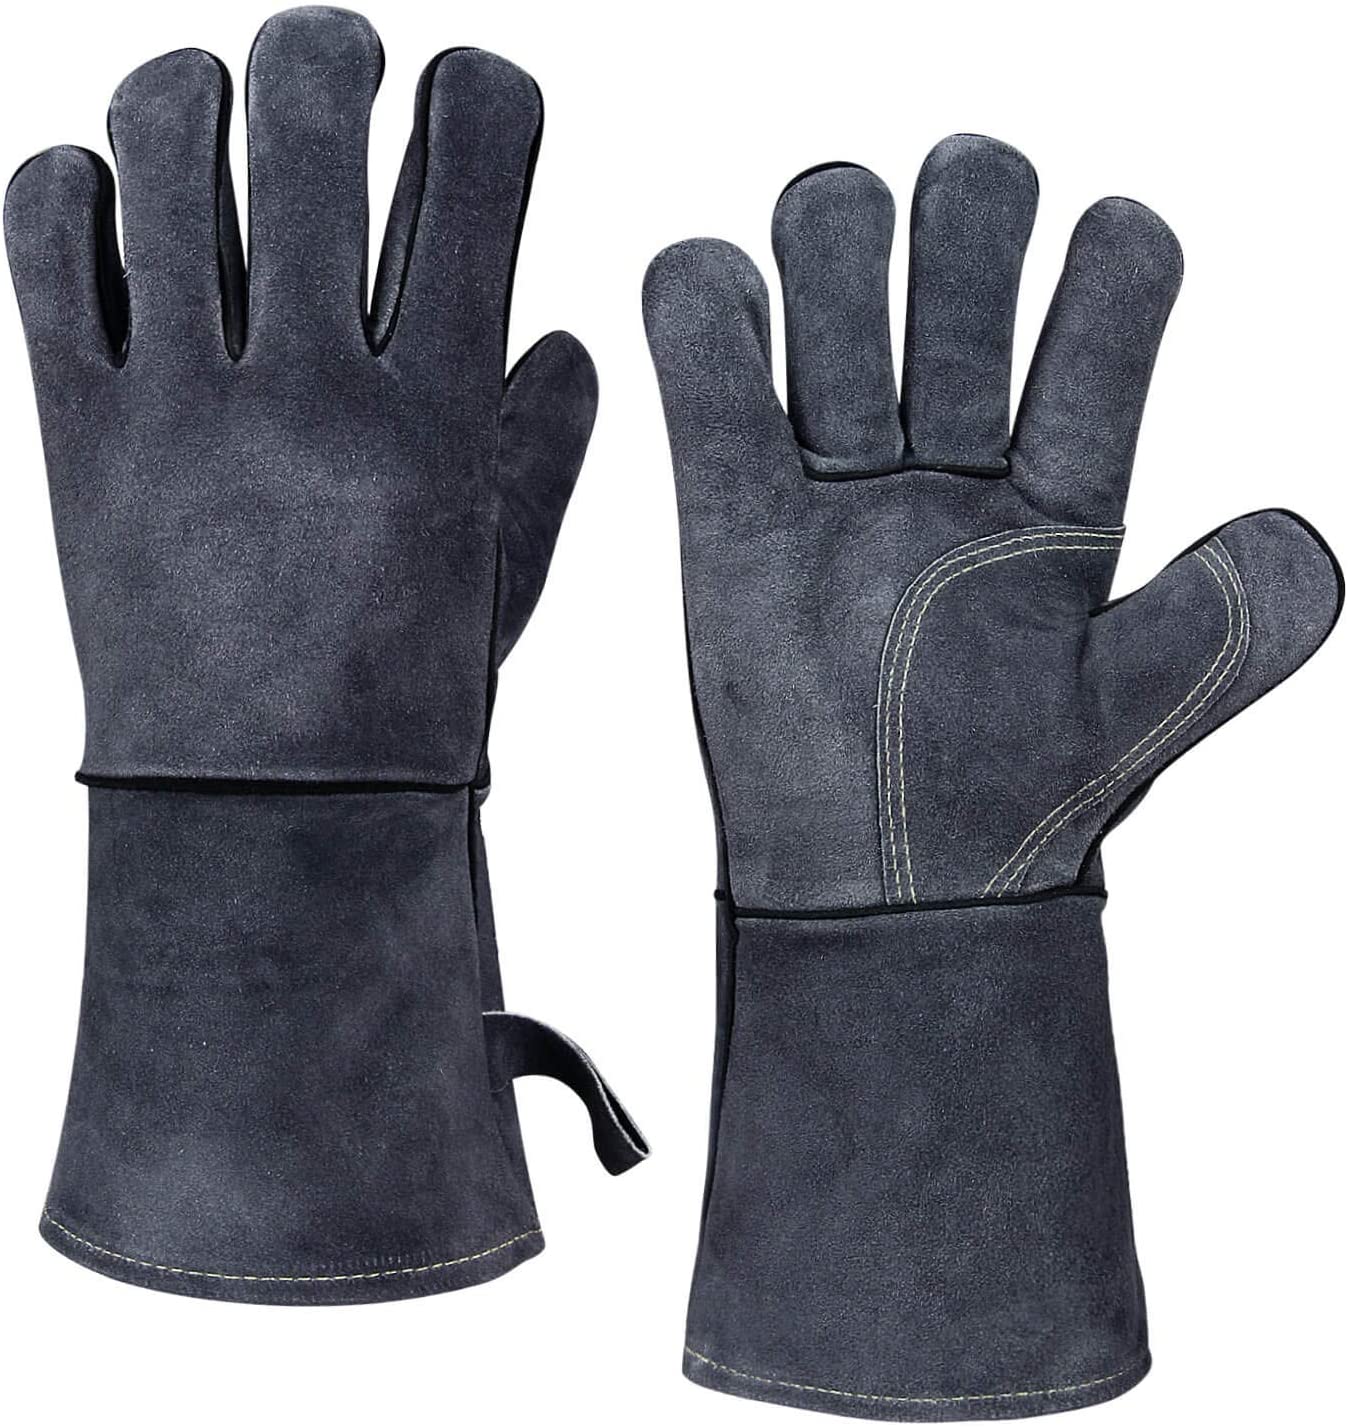 OZERO Reusable Cowhide Fireplace Gloves